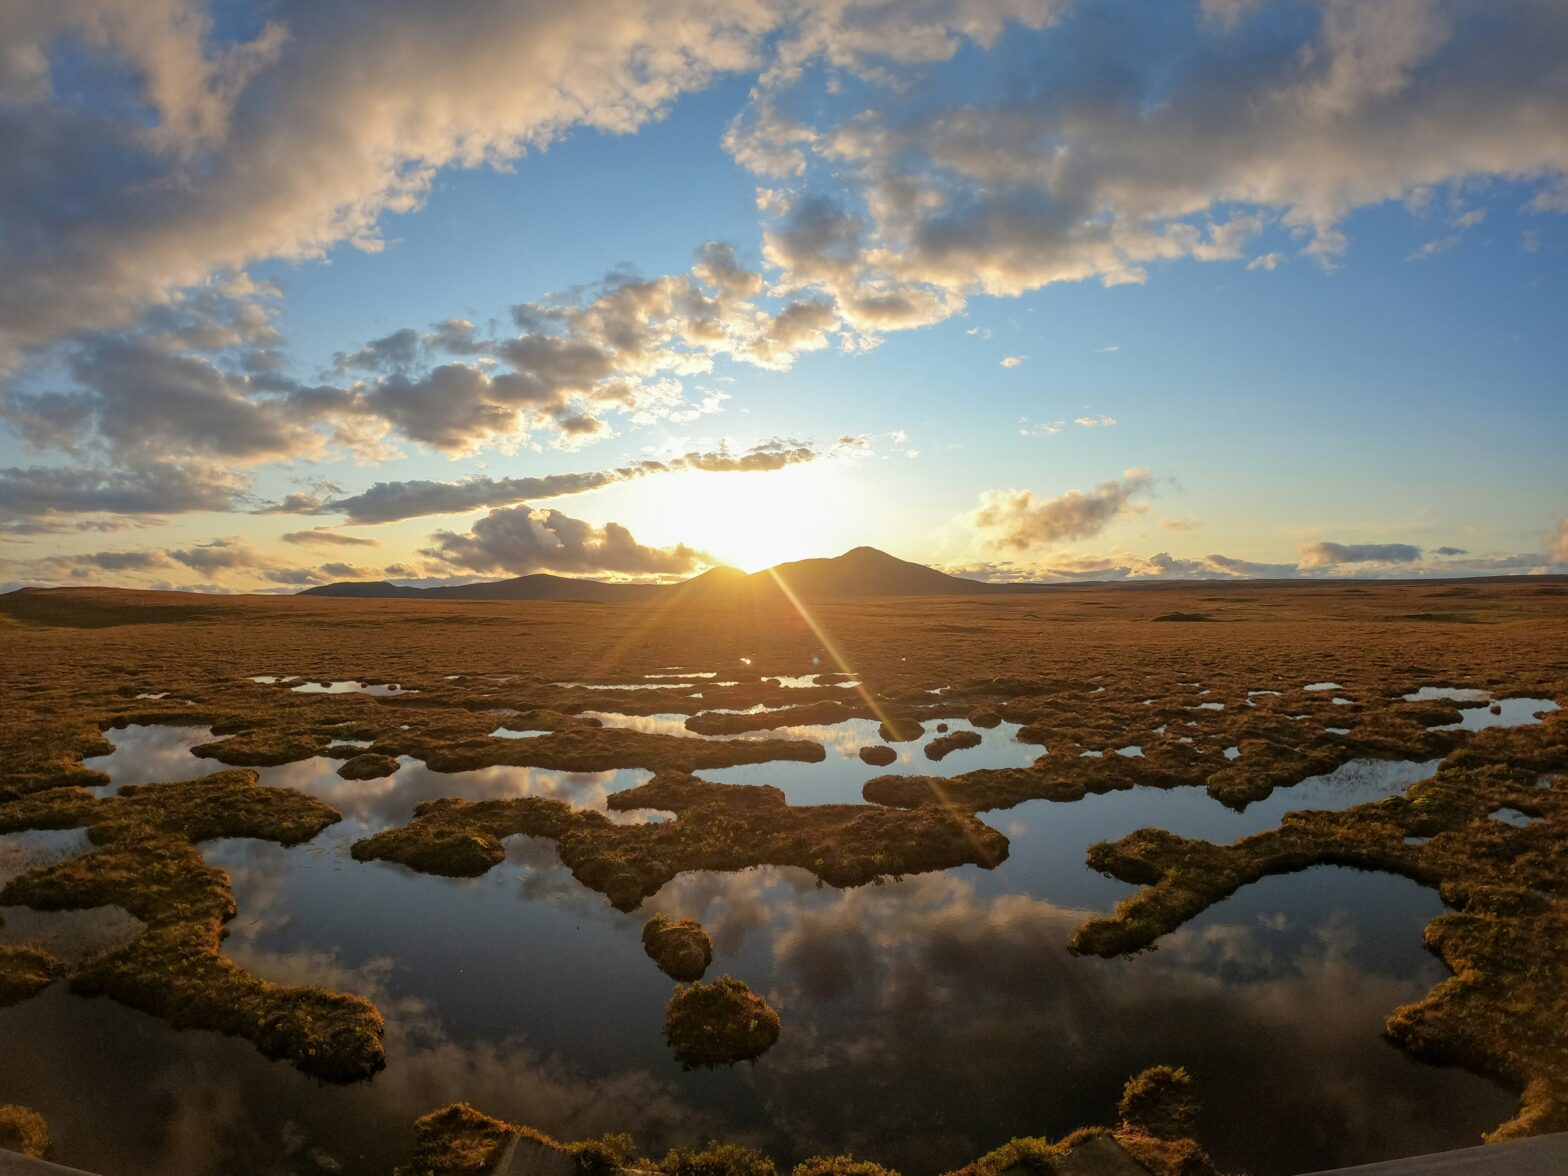 Peat bog in the setting sun by KB on Unsplash https://unsplash.com/photos/the-sun-is-setting-over-a-vast-expanse-of-water-axa5jckDcg4